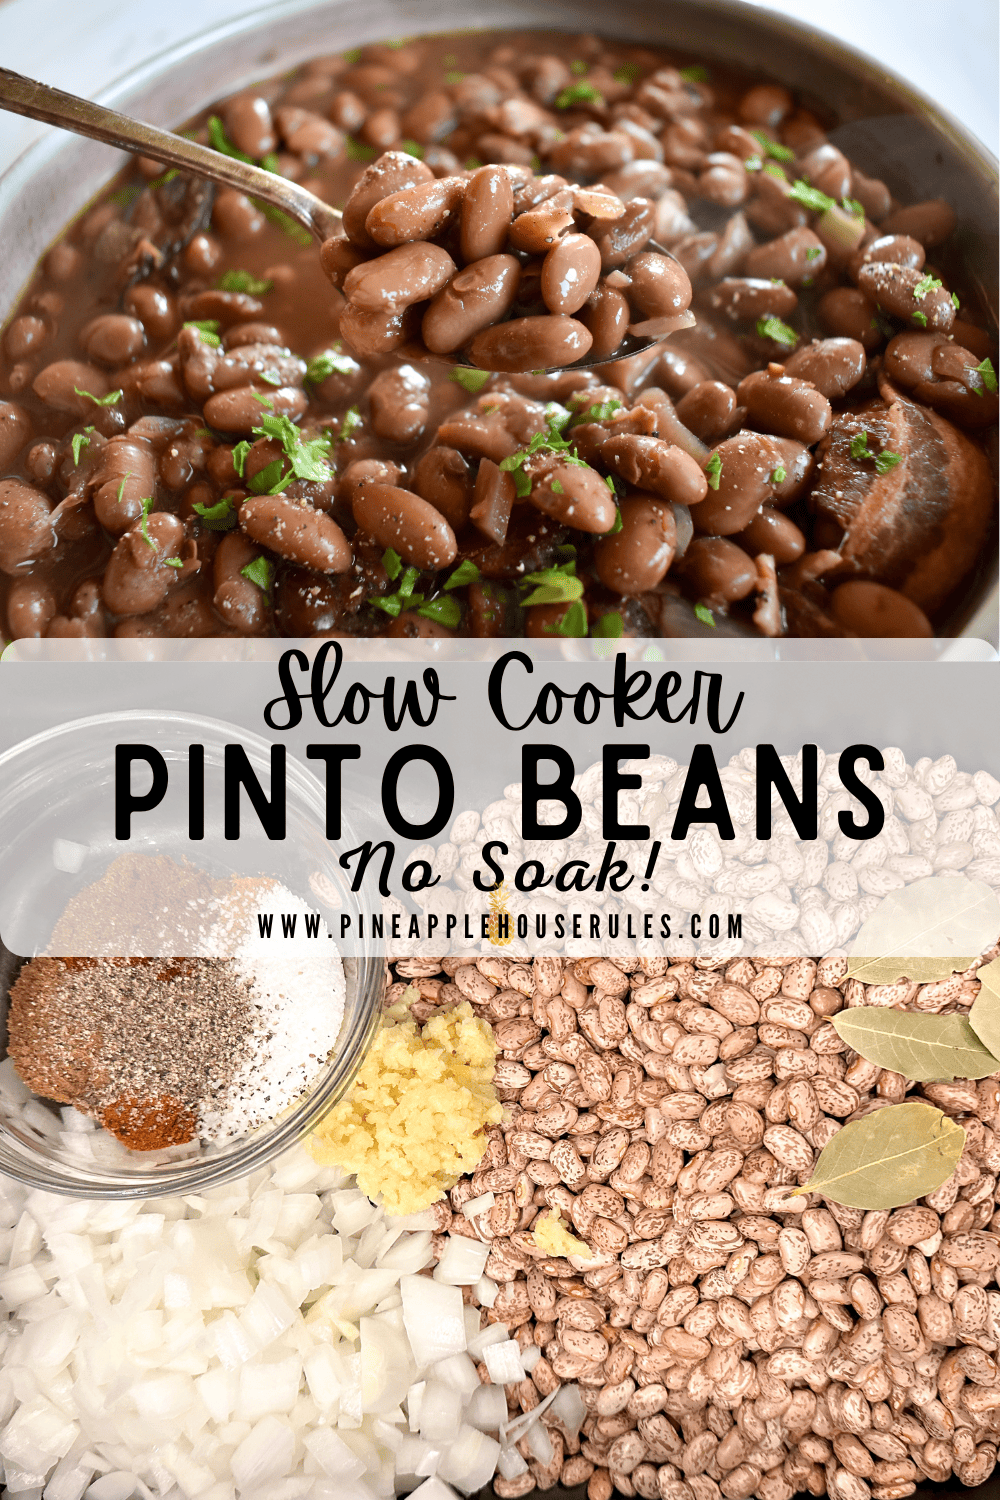 These Slow Cooker Pinto Beans are an easy dump and go recipe that doesn't involve soaking the beans ahead of time. It makes for a great Crock Pot Side Dish! Slow Cooker Pinto Beans | Pinto Beans | Pinto Beans in the Crock Pot | Pinto Beans Recipe | Pinto Beans Crockpot | Slow Cooker Pinto Beans with Bacon | Slow Cooker Pinto Beans No Soak | Slow Cooker Side Dishes | Slow Cooker Sides for a Crowd | Crock Pot Side Dishes | Crock Pot Sides | Crock Pot Side Dishes for a Crowd | Crock Pot Side Dish